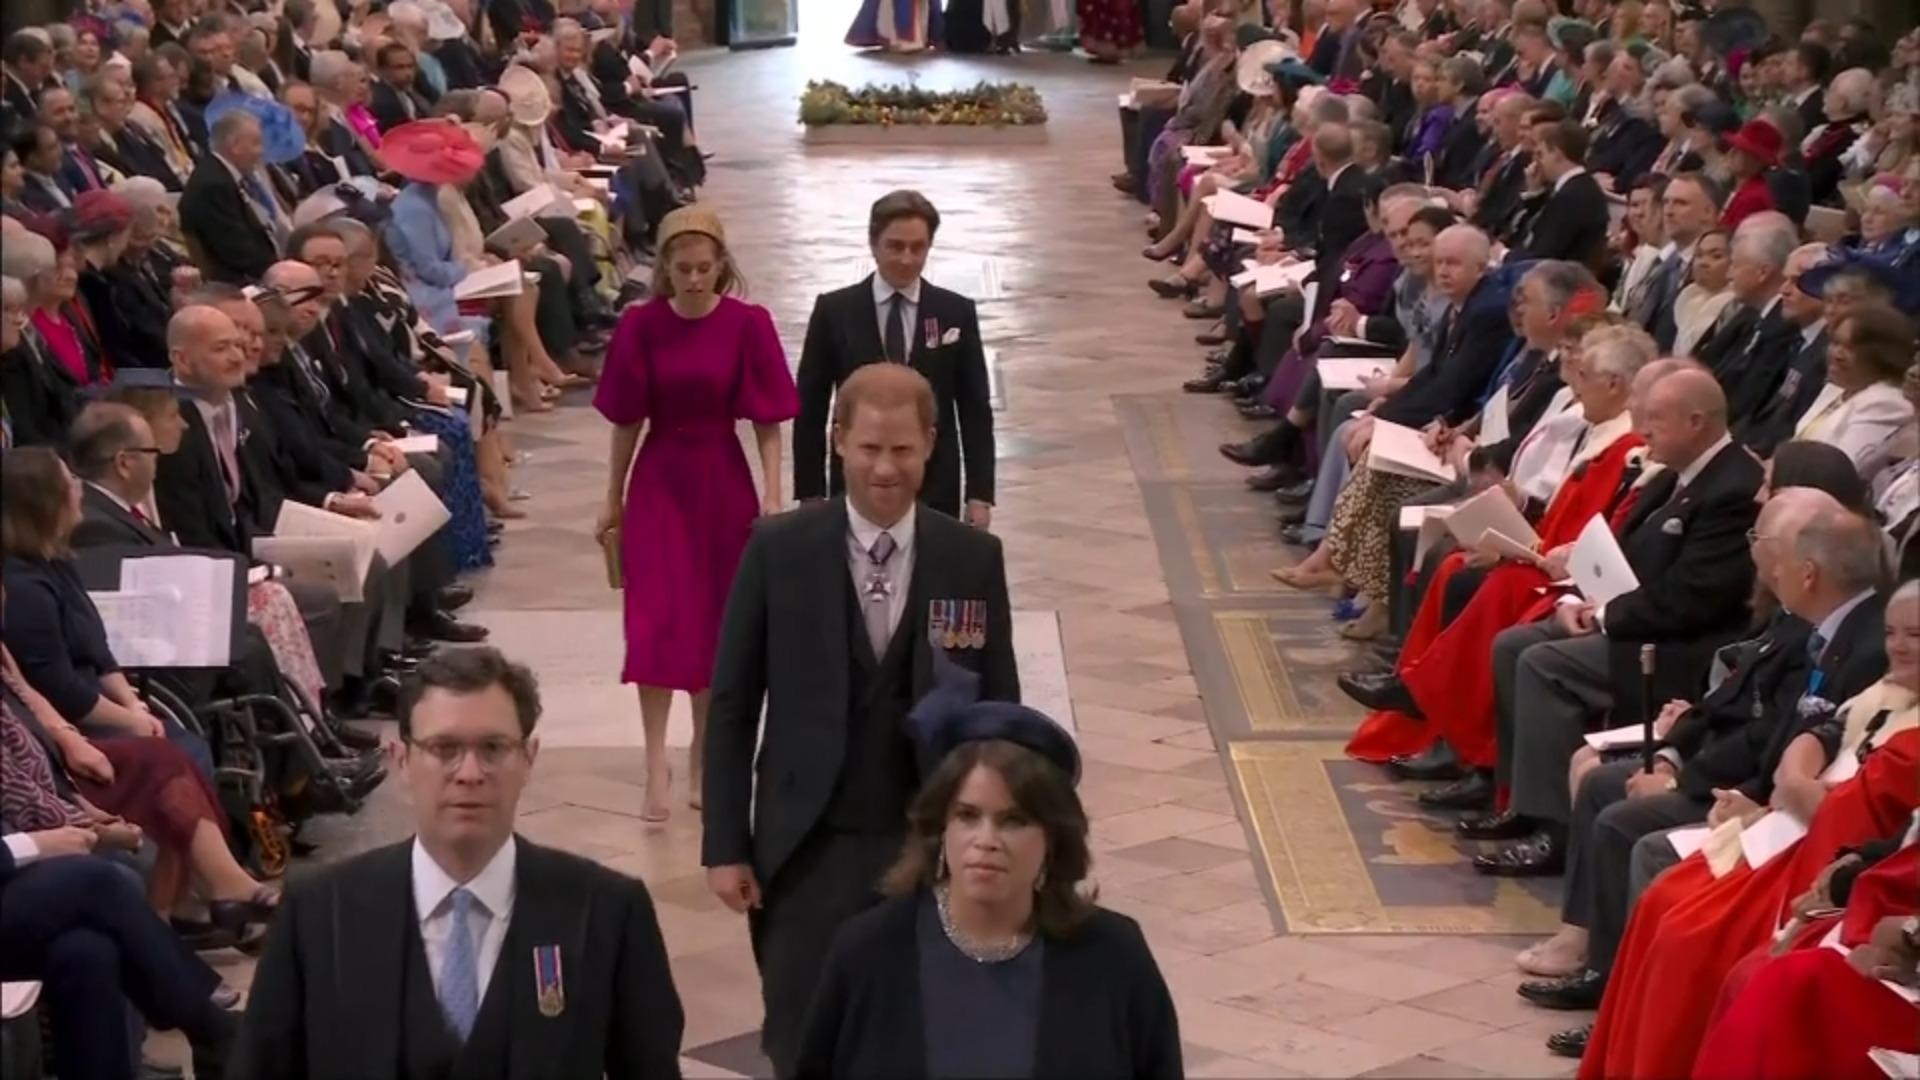 First photos of Harry: Here he enters the church!  The Prodigal Son is here!